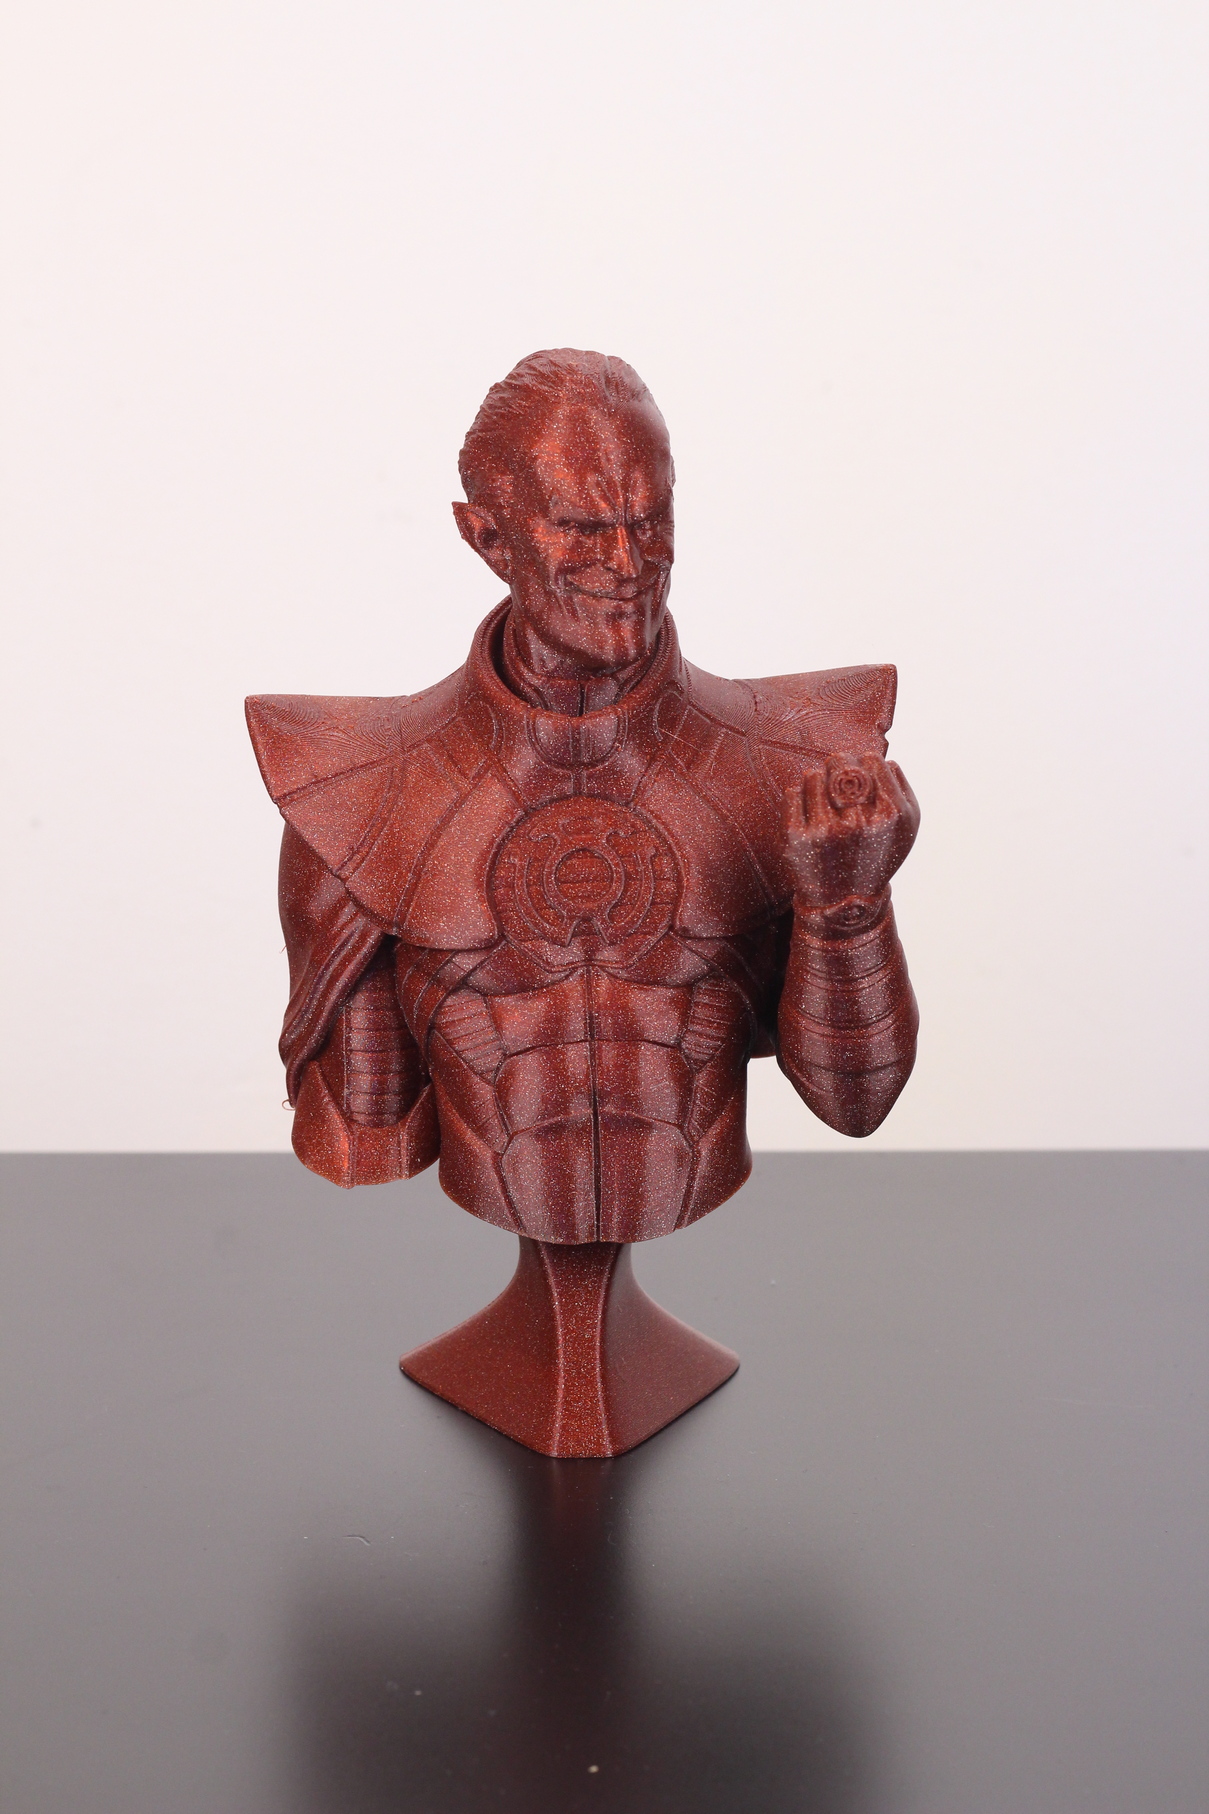 Sinestro Bust printed on the BIQU B1 SE Plus 6 | BIQU B1 SE PLUS Review: SKR 2 and ABL from Factory